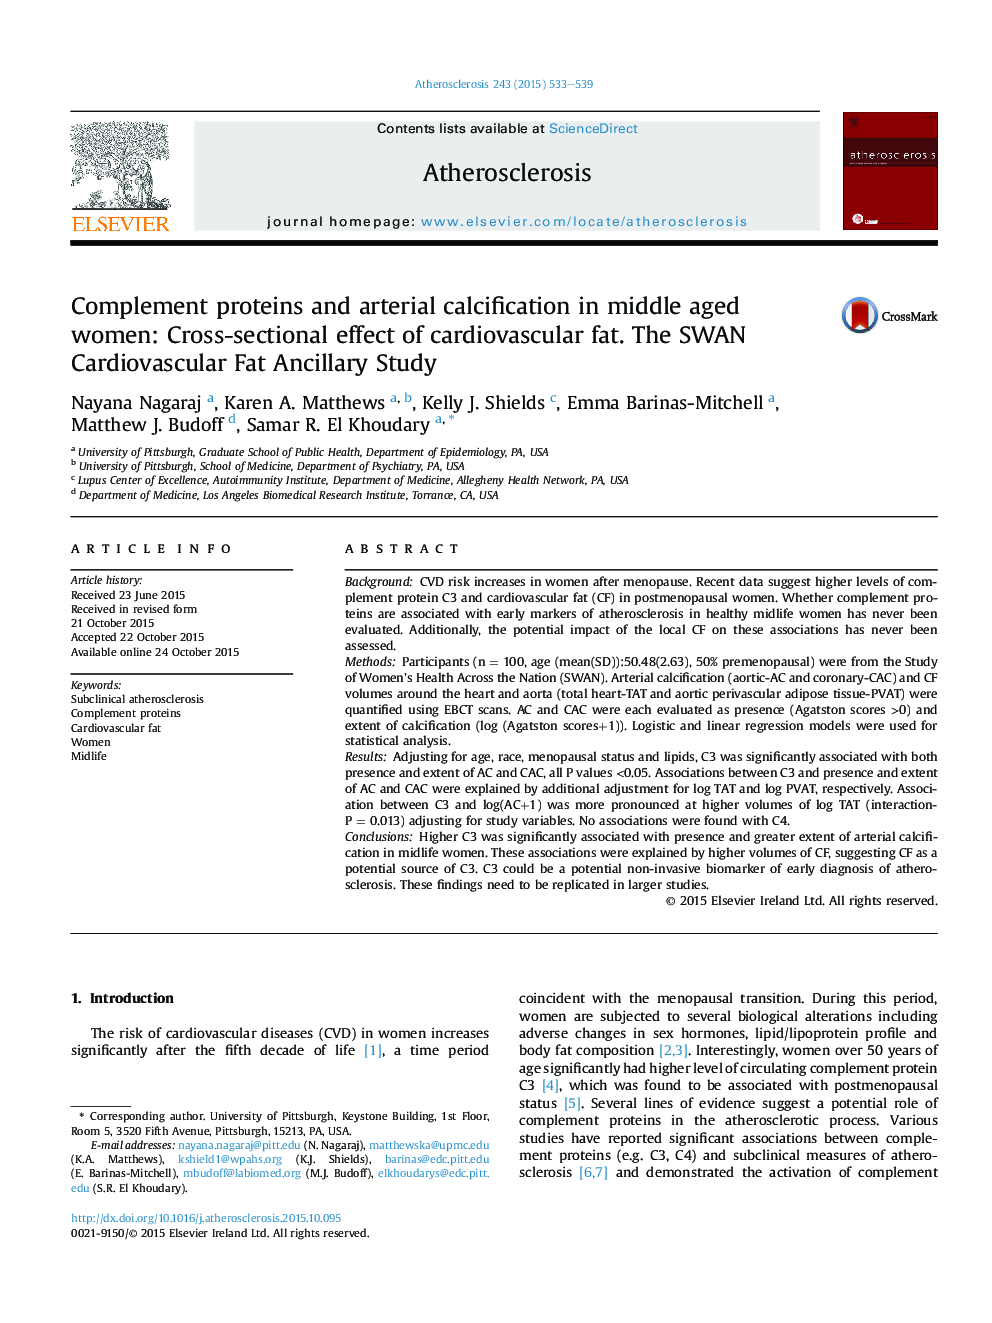 Complement proteins and arterial calcification in middle aged women: Cross-sectional effect of cardiovascular fat. The SWAN Cardiovascular Fat Ancillary Study